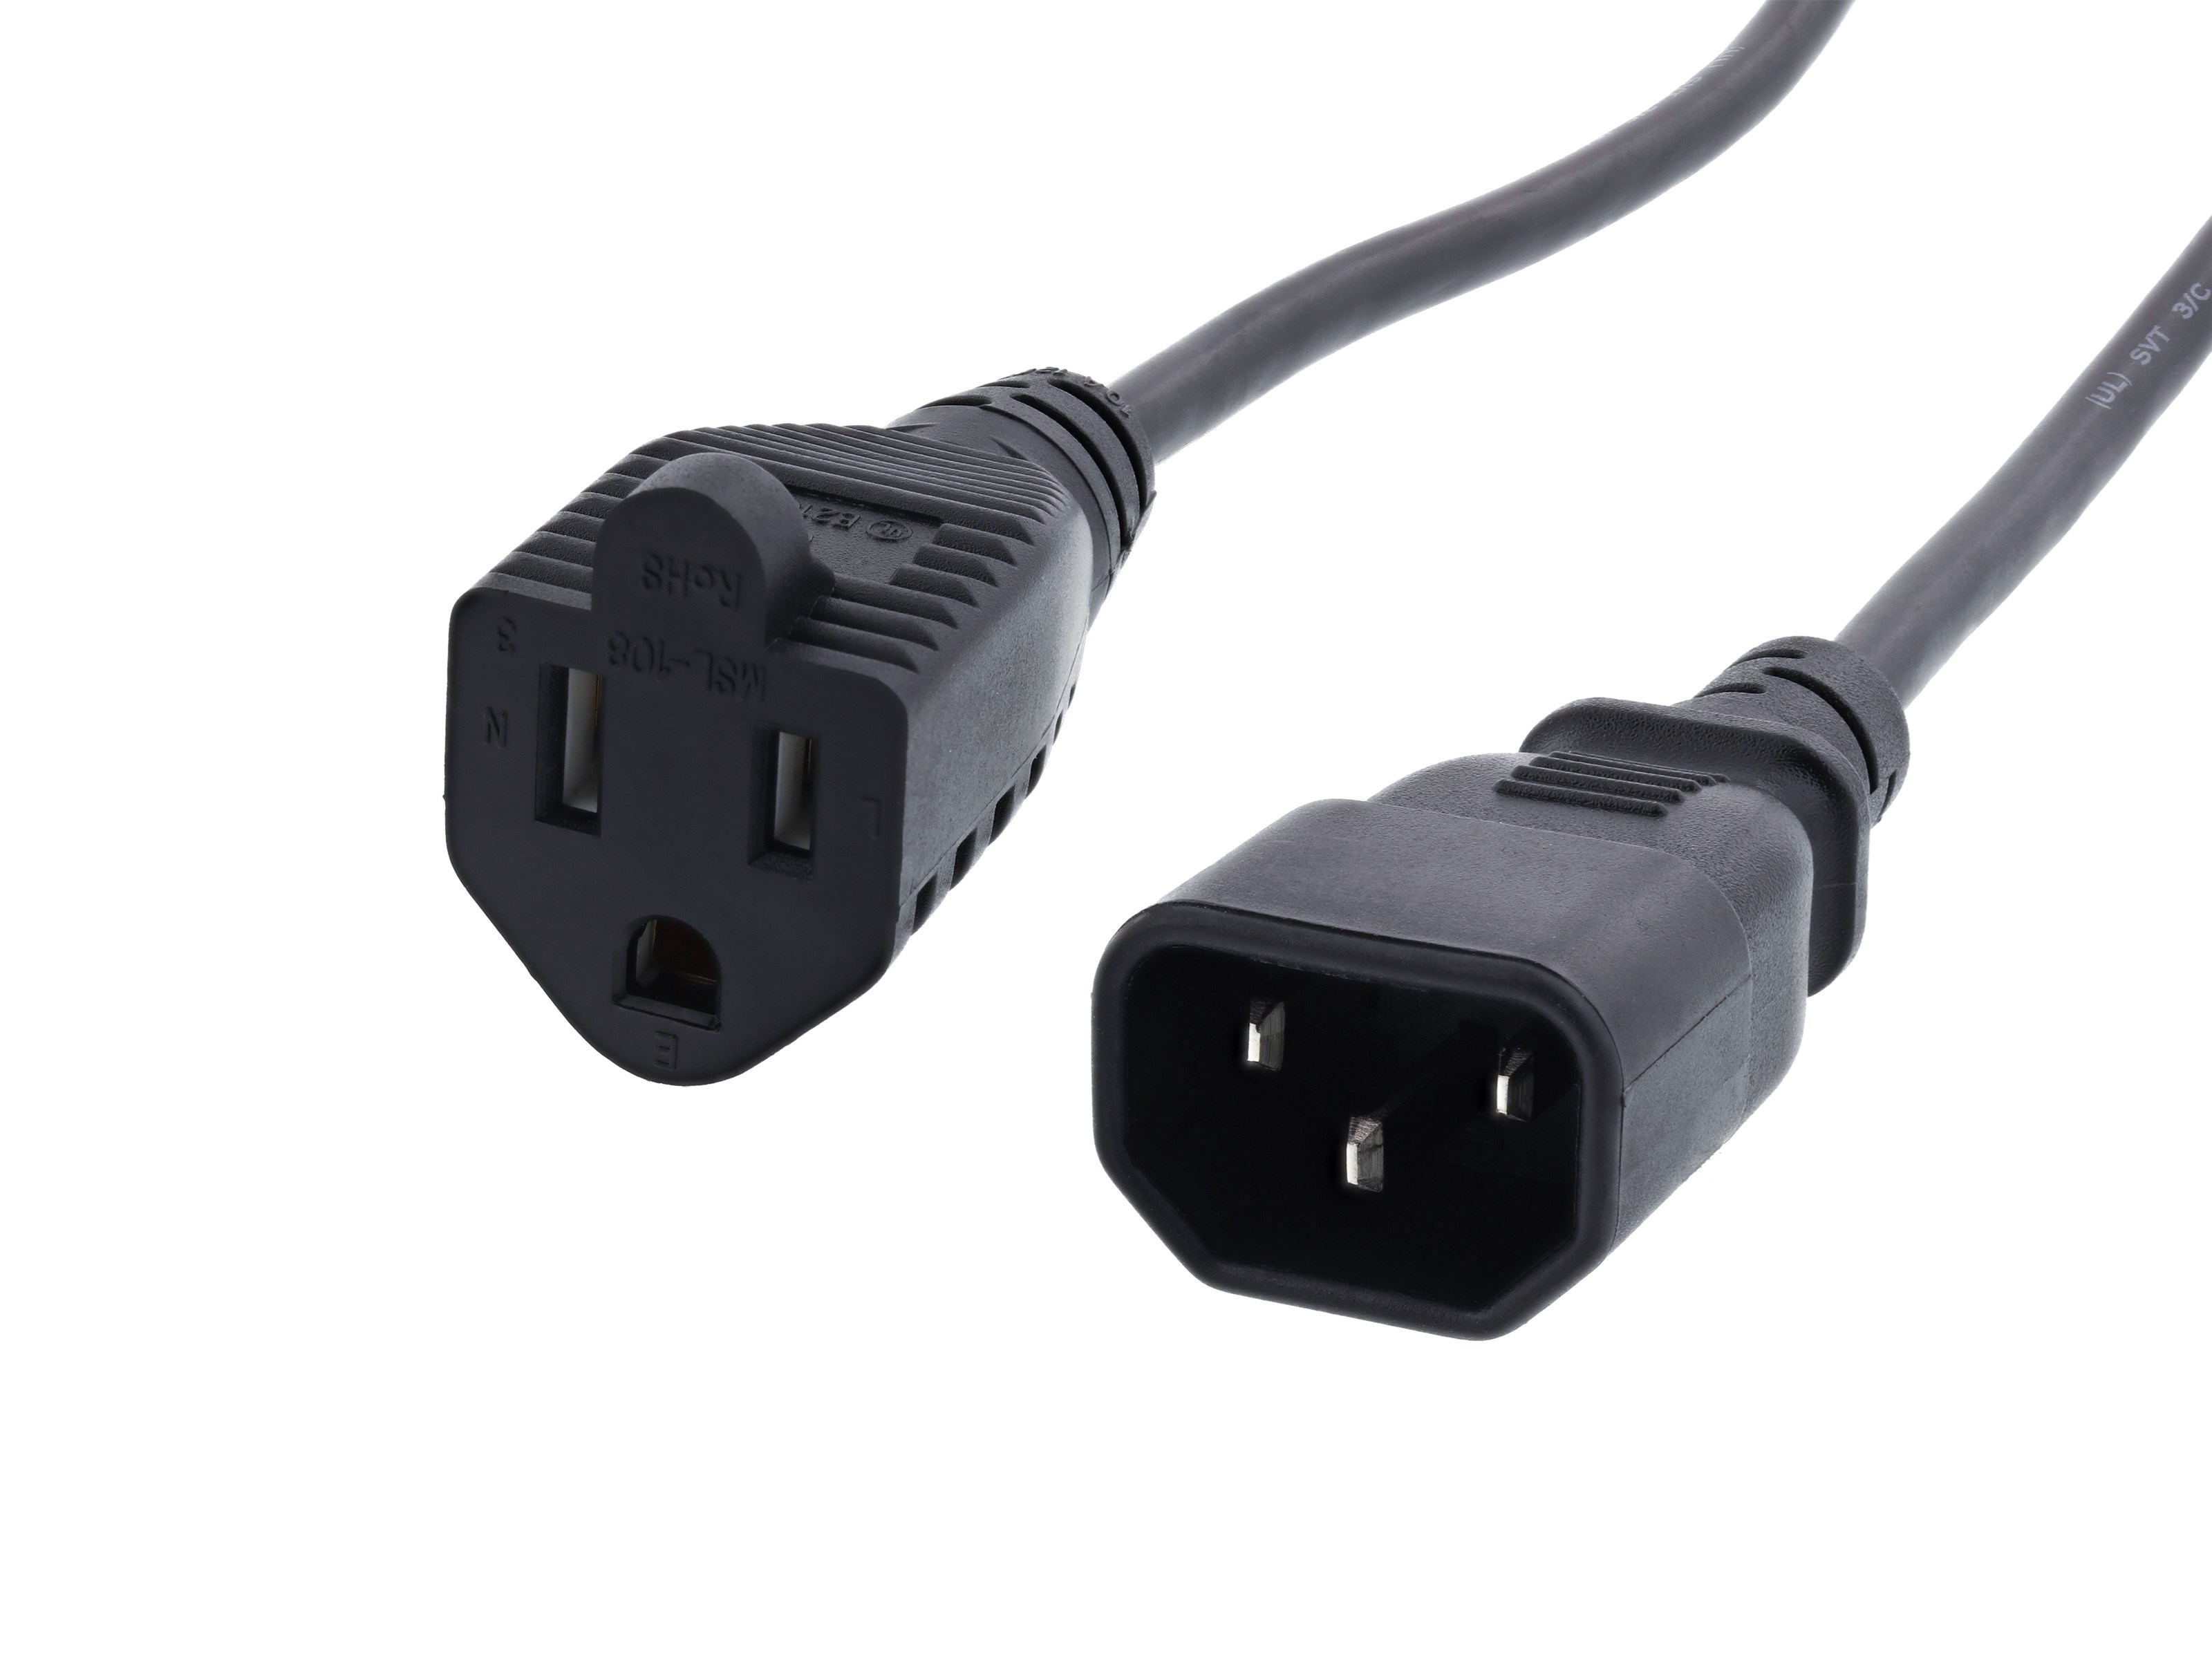 6' BenQ Heavy Duty POWER CORD 3-Prong AC Cable LCD LED Monitor plug long 